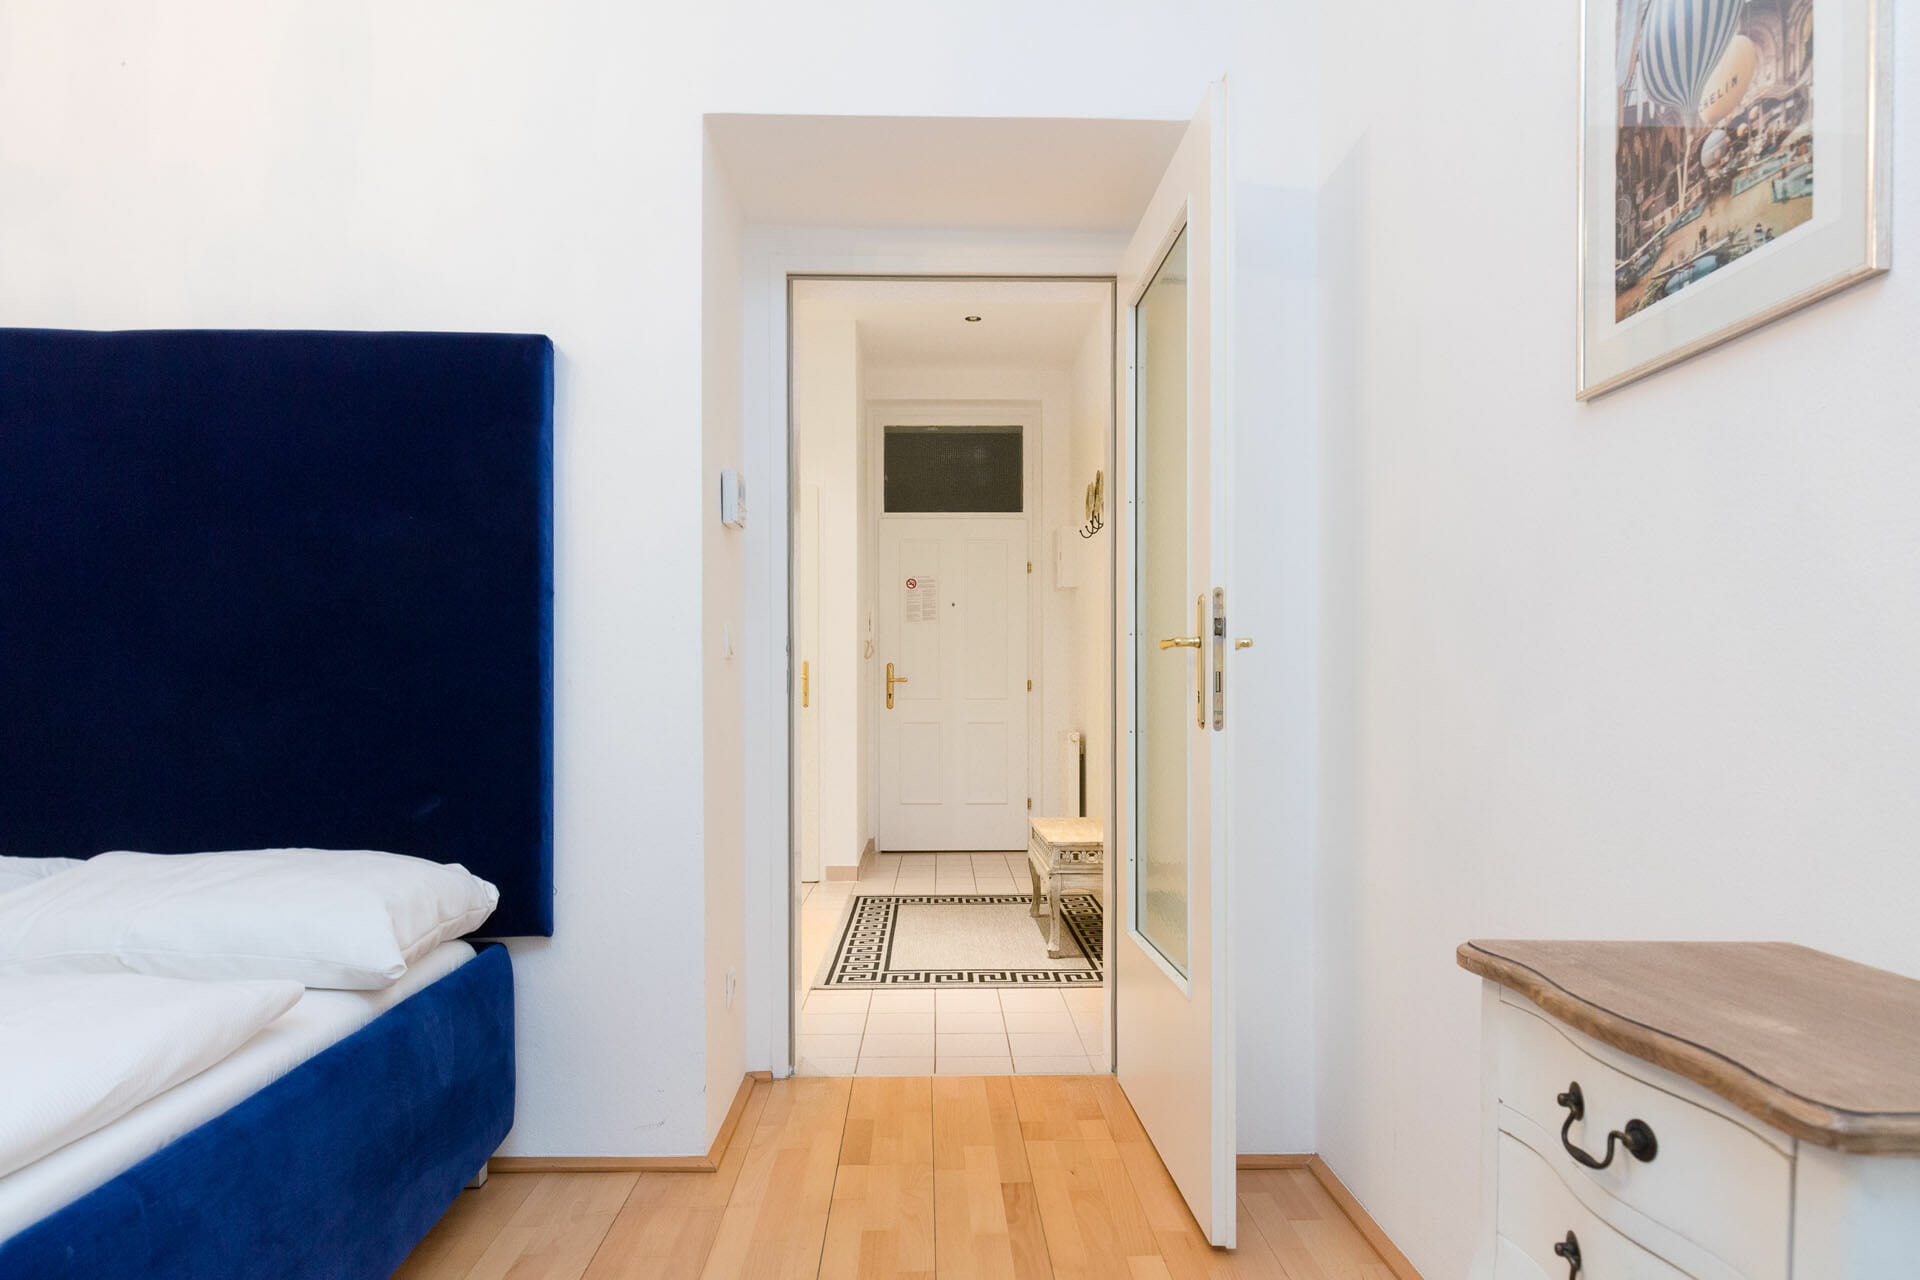 Prestige Apartments in Vienna Austria. Alser Strasse 14. Cosy studio apartment in the heart of Vienna. The apartment is located on the second hallway on the mezzanin floor and is facing the very quiet backyard. The open plan kitchen is separated from the living bedroom.